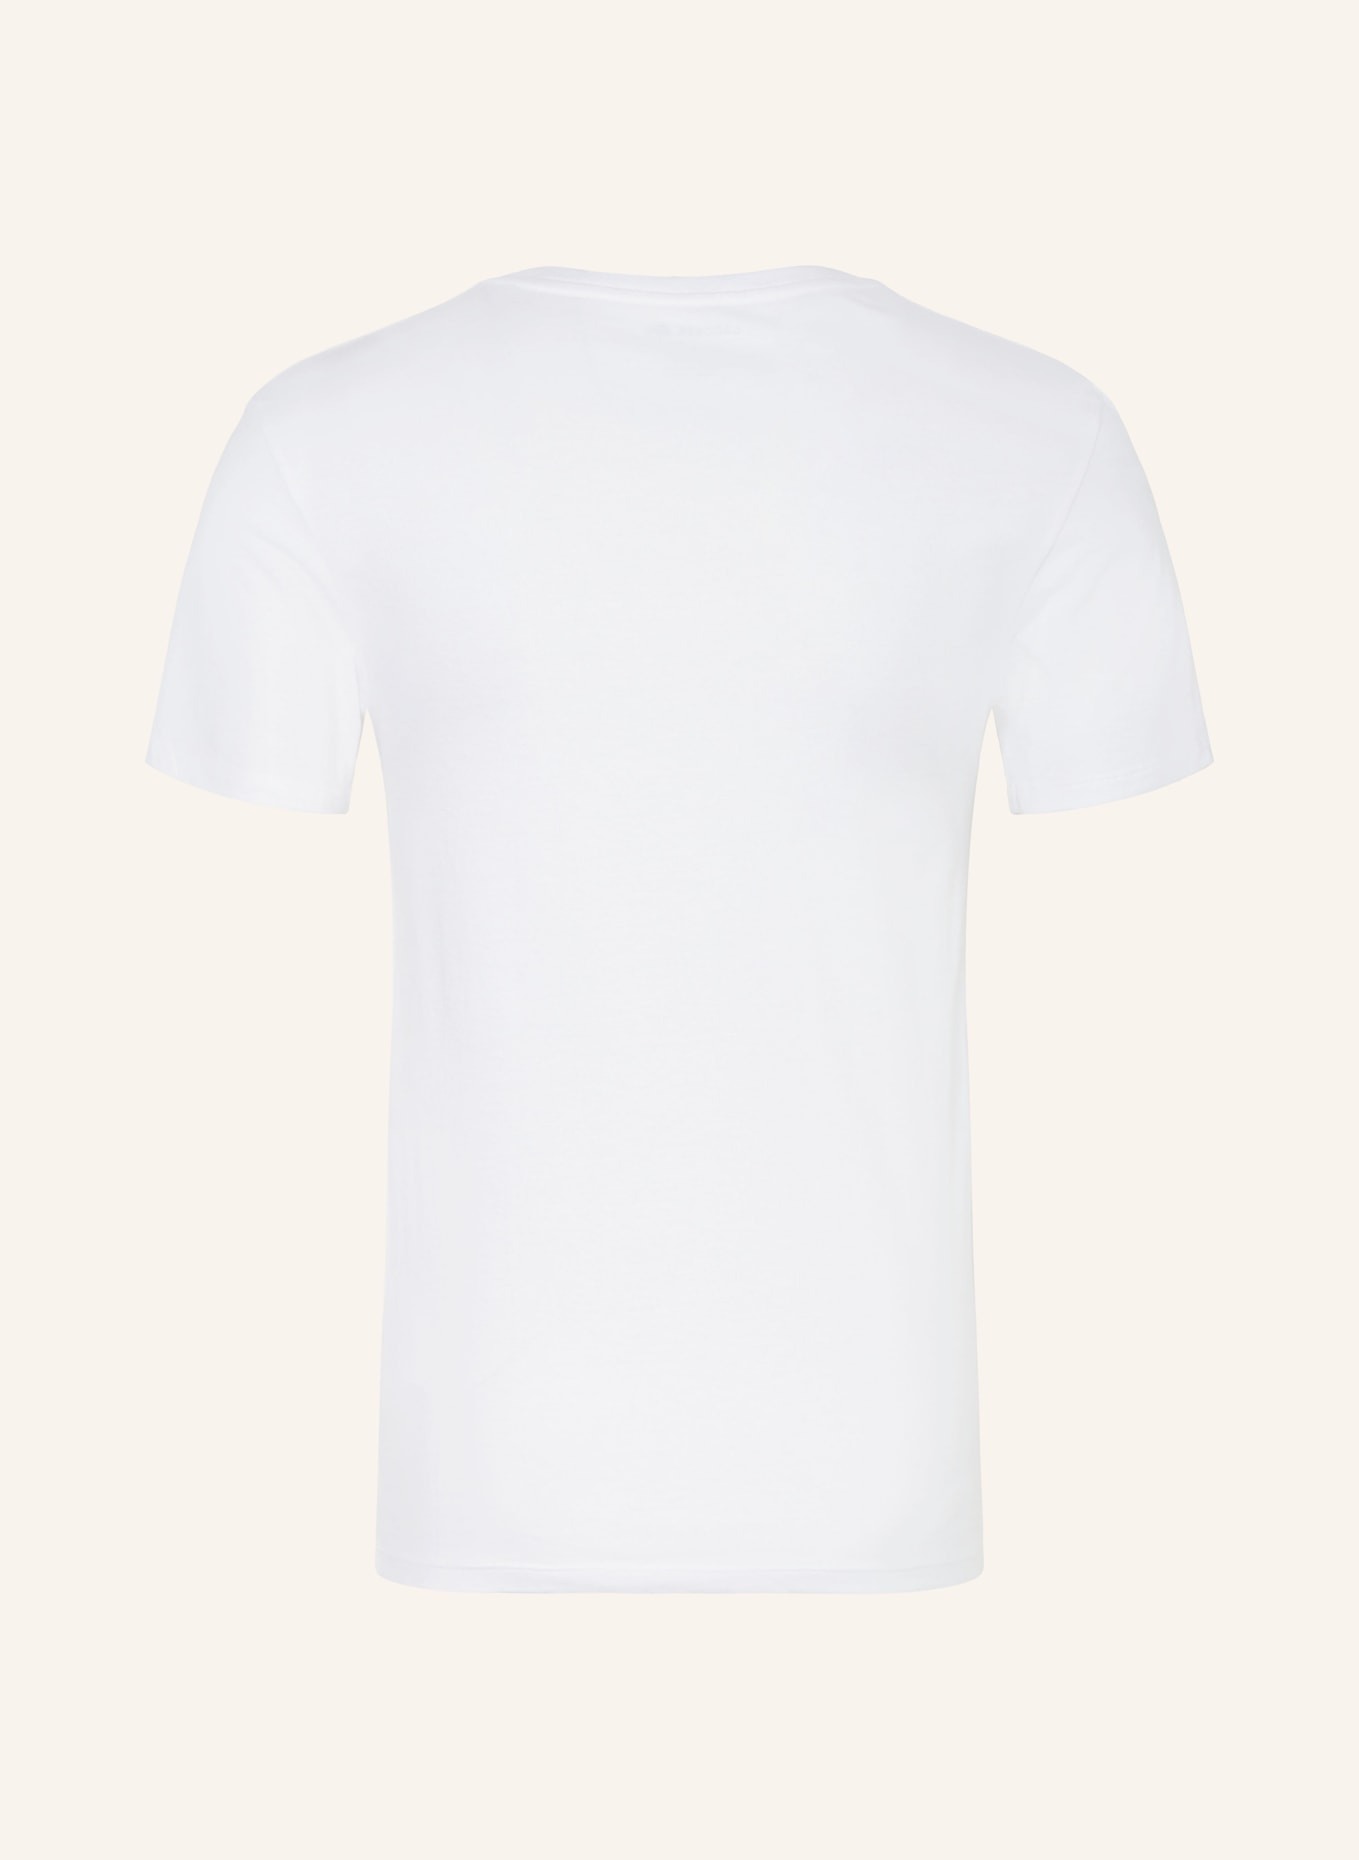 LACOSTE 3er-Pack T-Shirts, Farbe: WEISS (Bild 2)